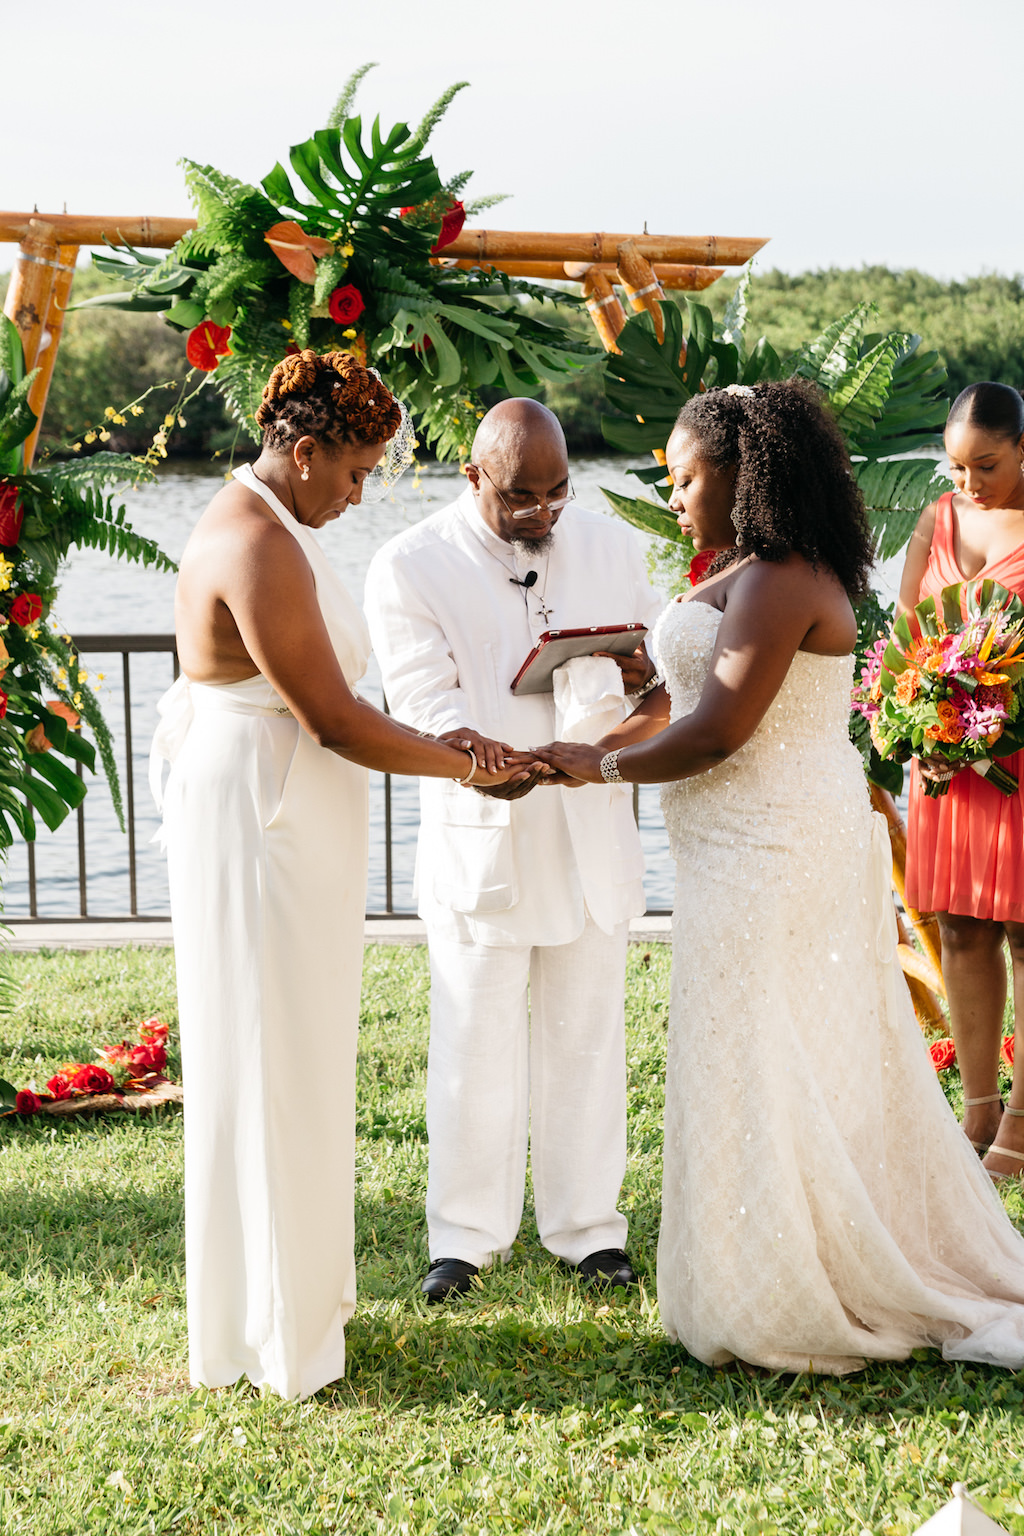 Outdoor Waterfront Wedding Ceremony Portrait, Brides in BHDLN Halter Pantsuit and Strapless Davids Bridal Dress, with Bamboo Ceremony Arch with Red and Orange Florals with Tropical Greenery